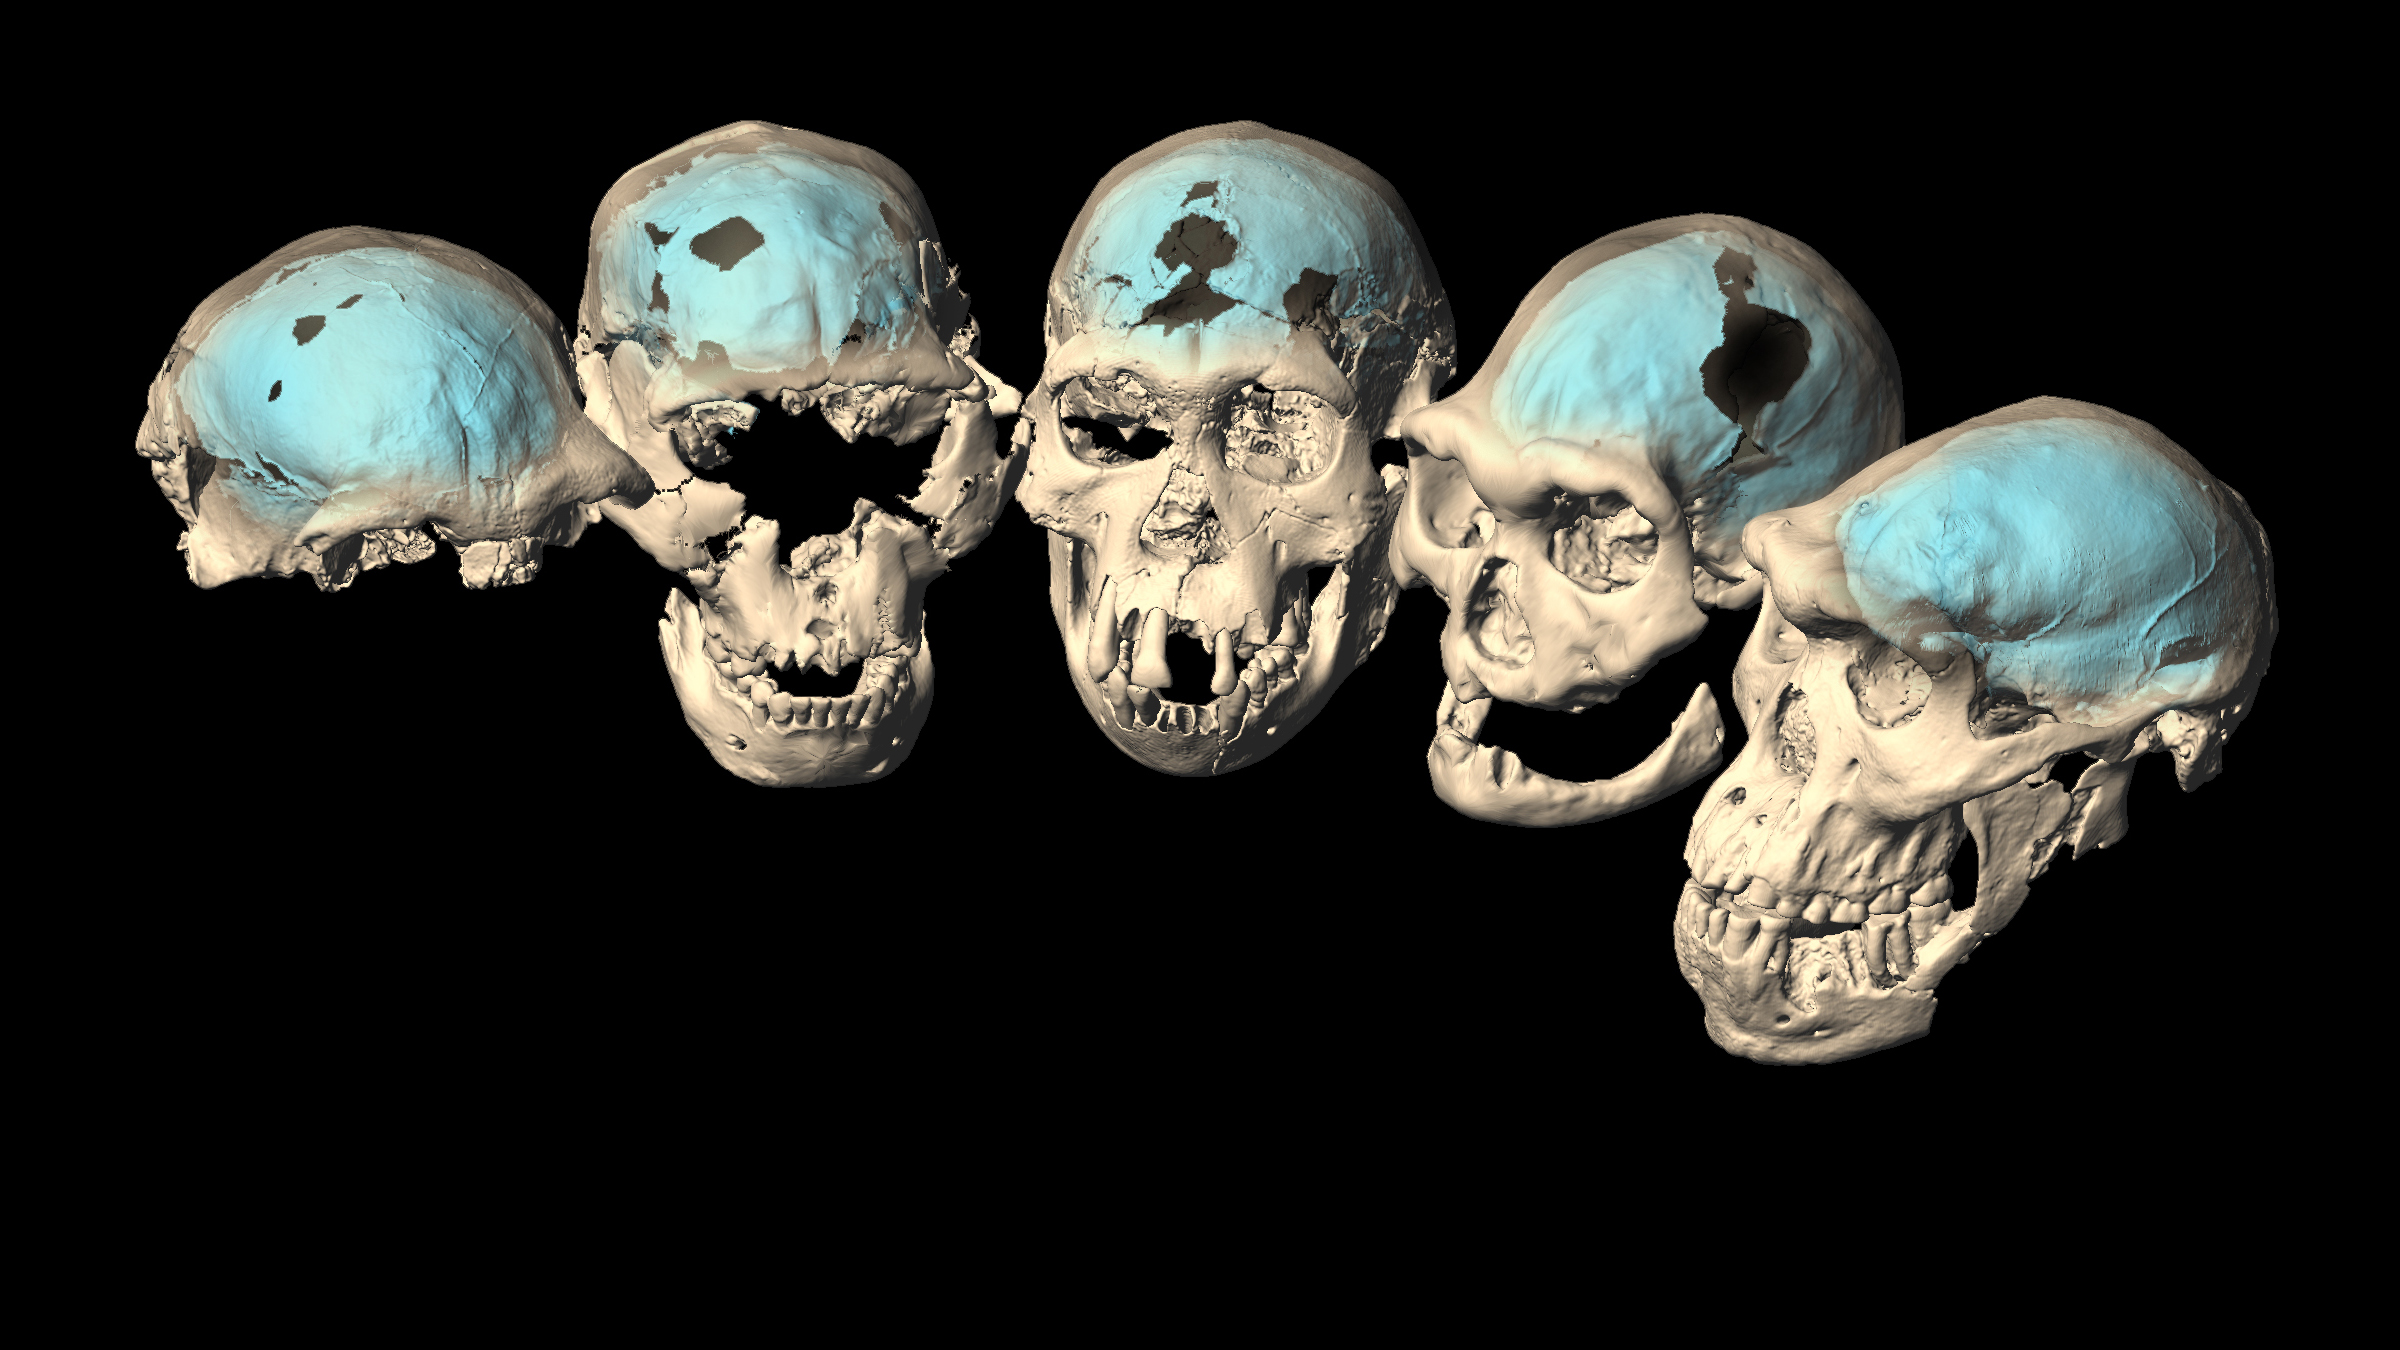 Virtual reconstructions of the five well-preserved Homo erectus skulls from Dmanisi, Georgia, dated to between 1.85 million and 1.77 million years ago.